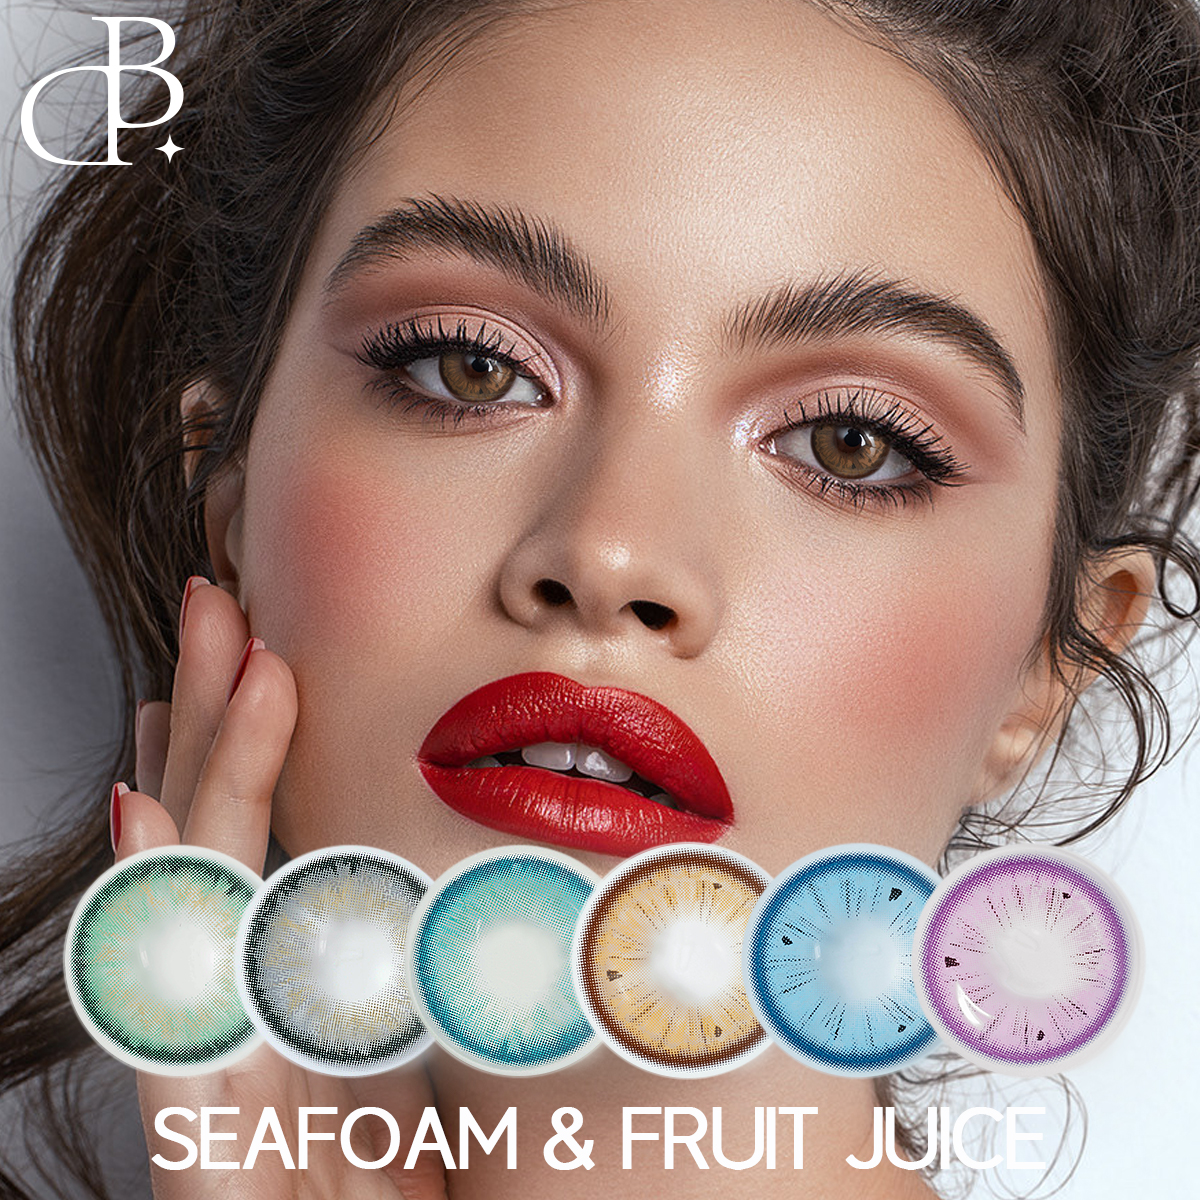 https://www.dblenses.com/seafoamfruit-juice-oemodm-contacto-new-style-natural-eyes-Colors-lens-cosmetic-eyes-lens-color-contacts-lenses-product/